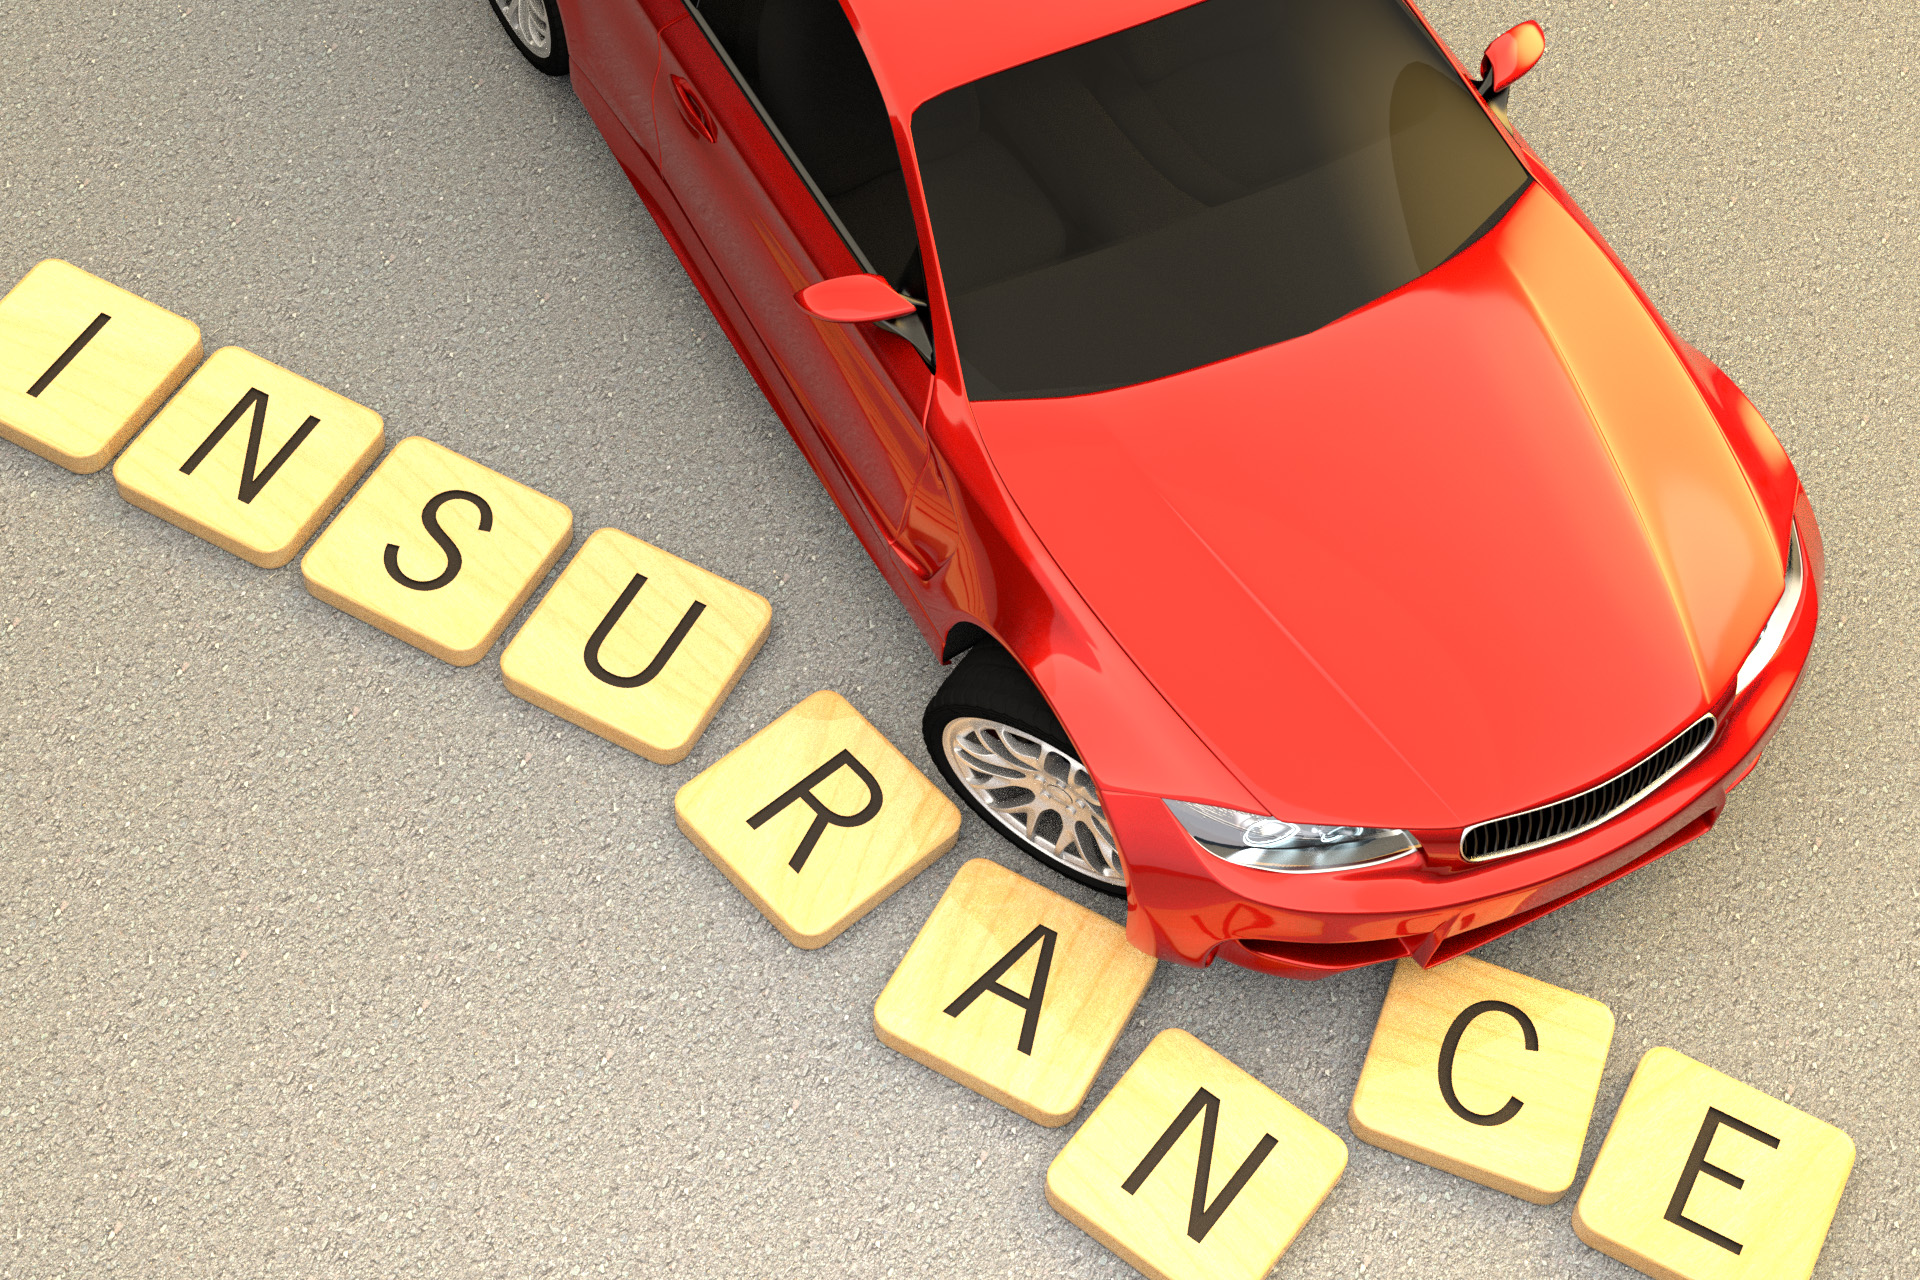 Auto insurance accident concept image free image download